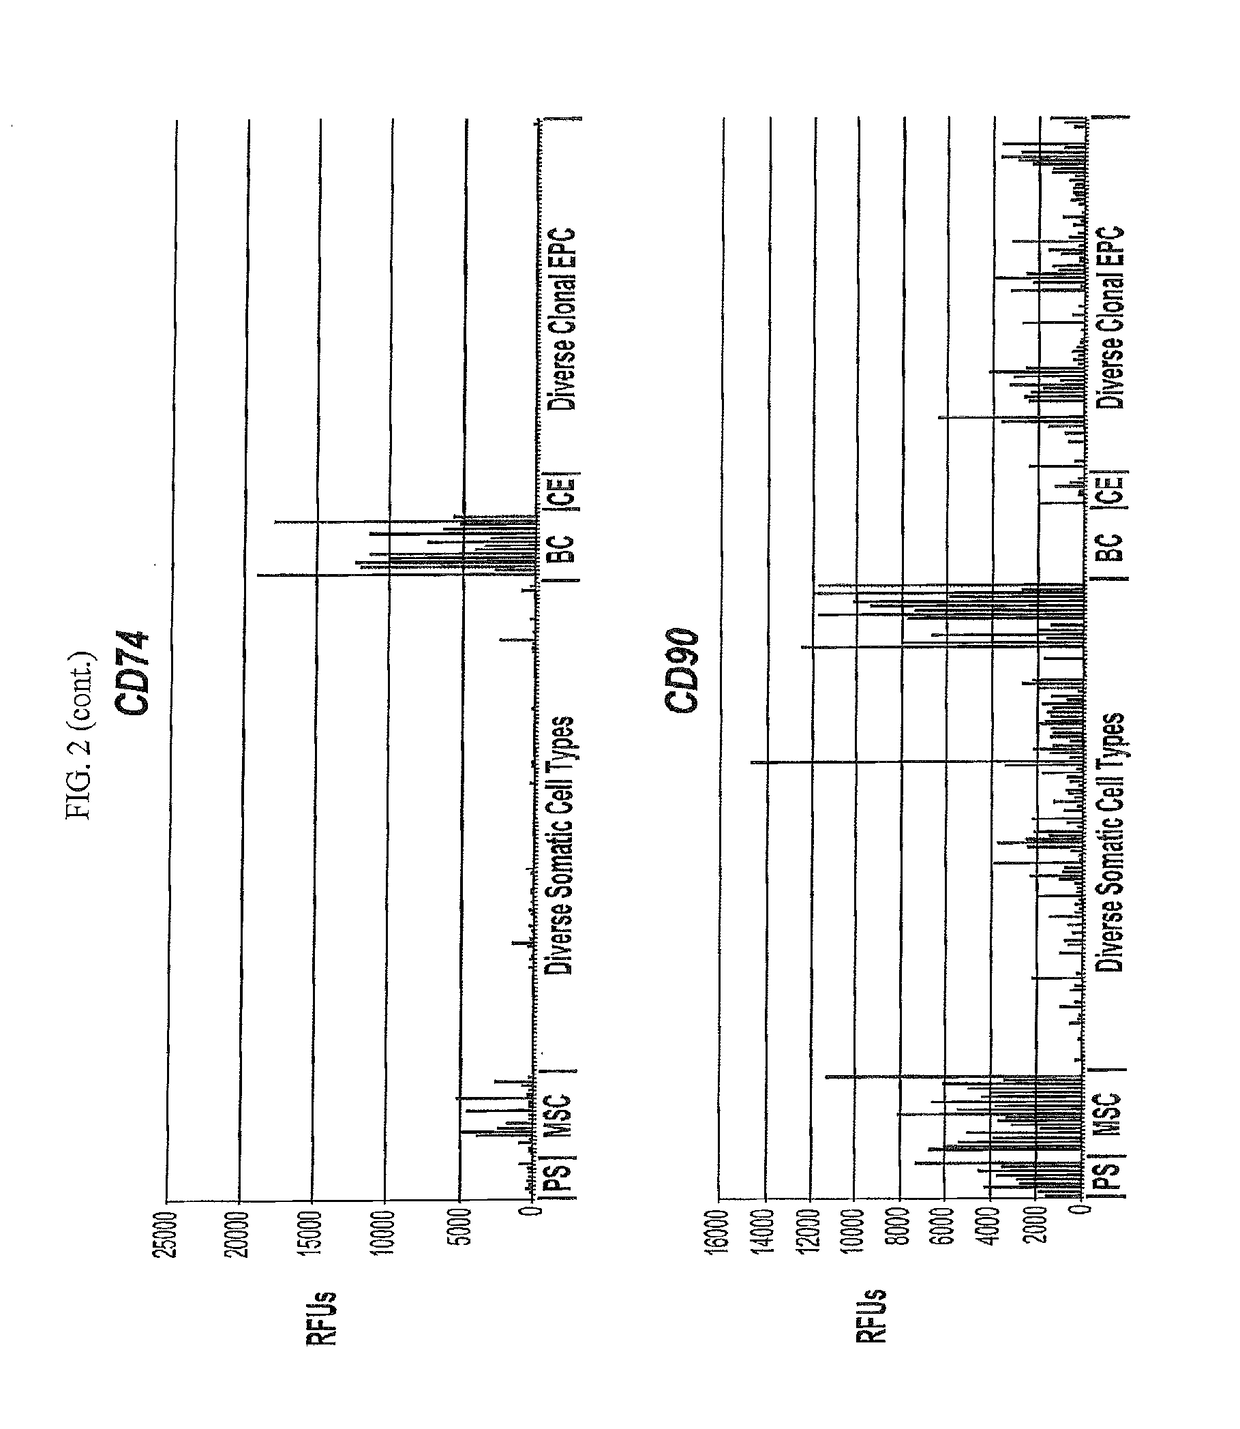 Differentiated progeny of clonal progenitor cell lines